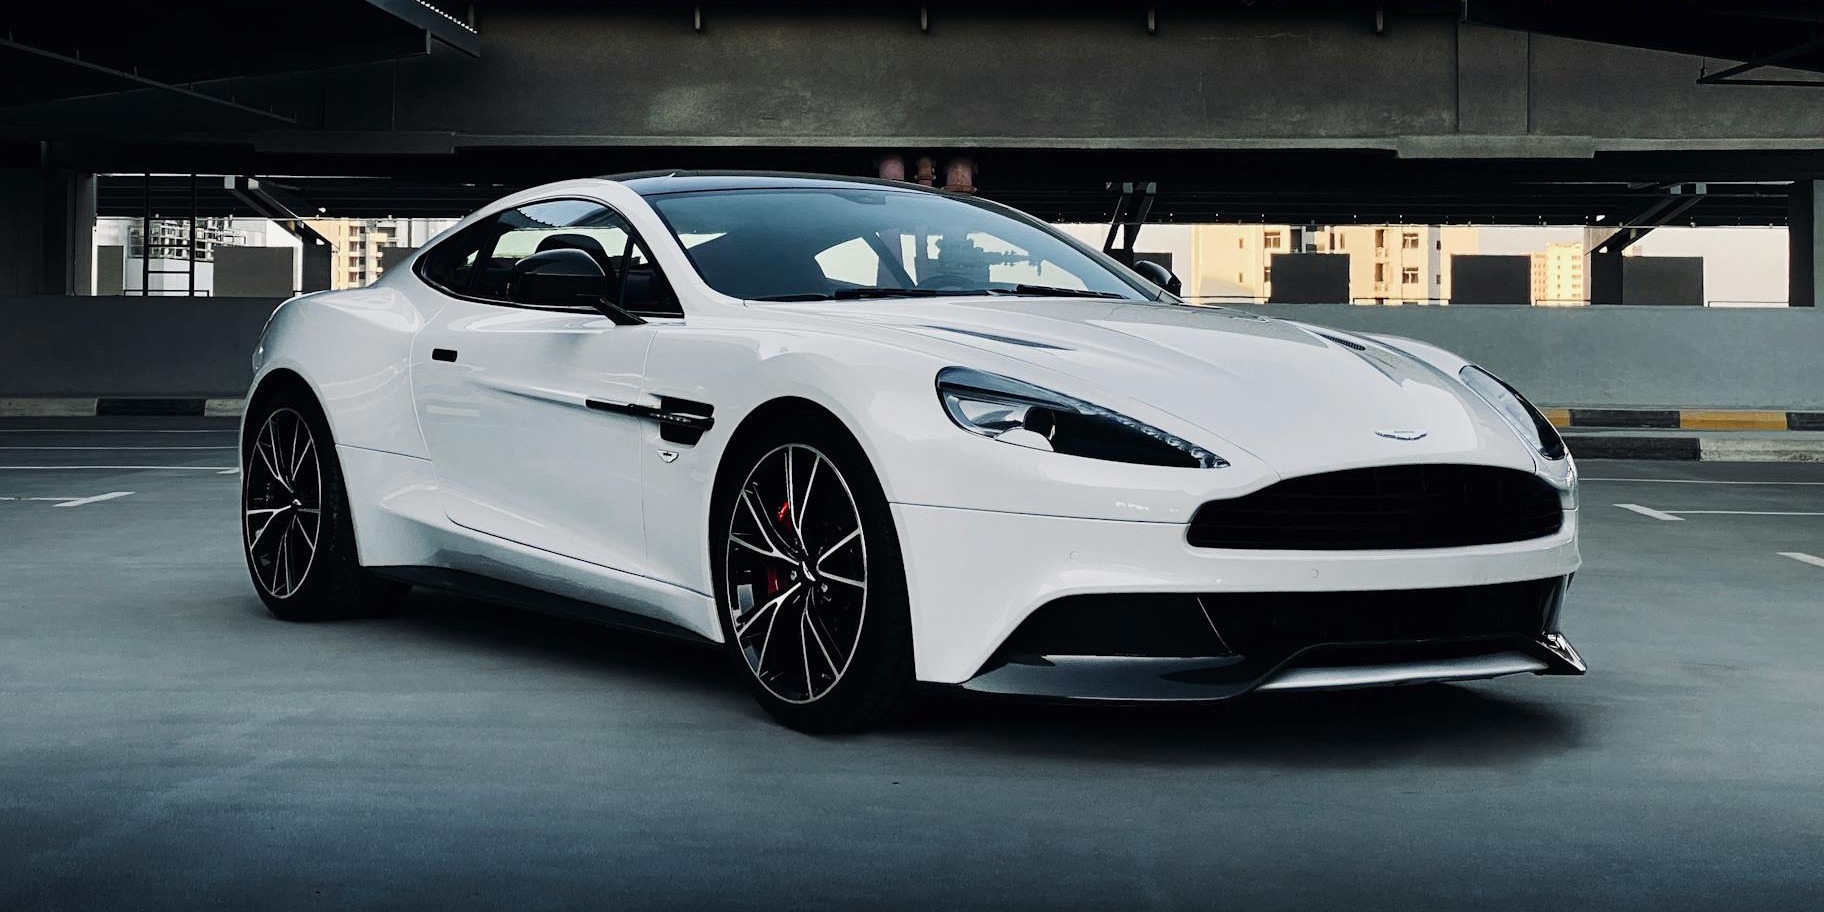 Aston Martin Hire: What You Need to Know Before Your Next Event